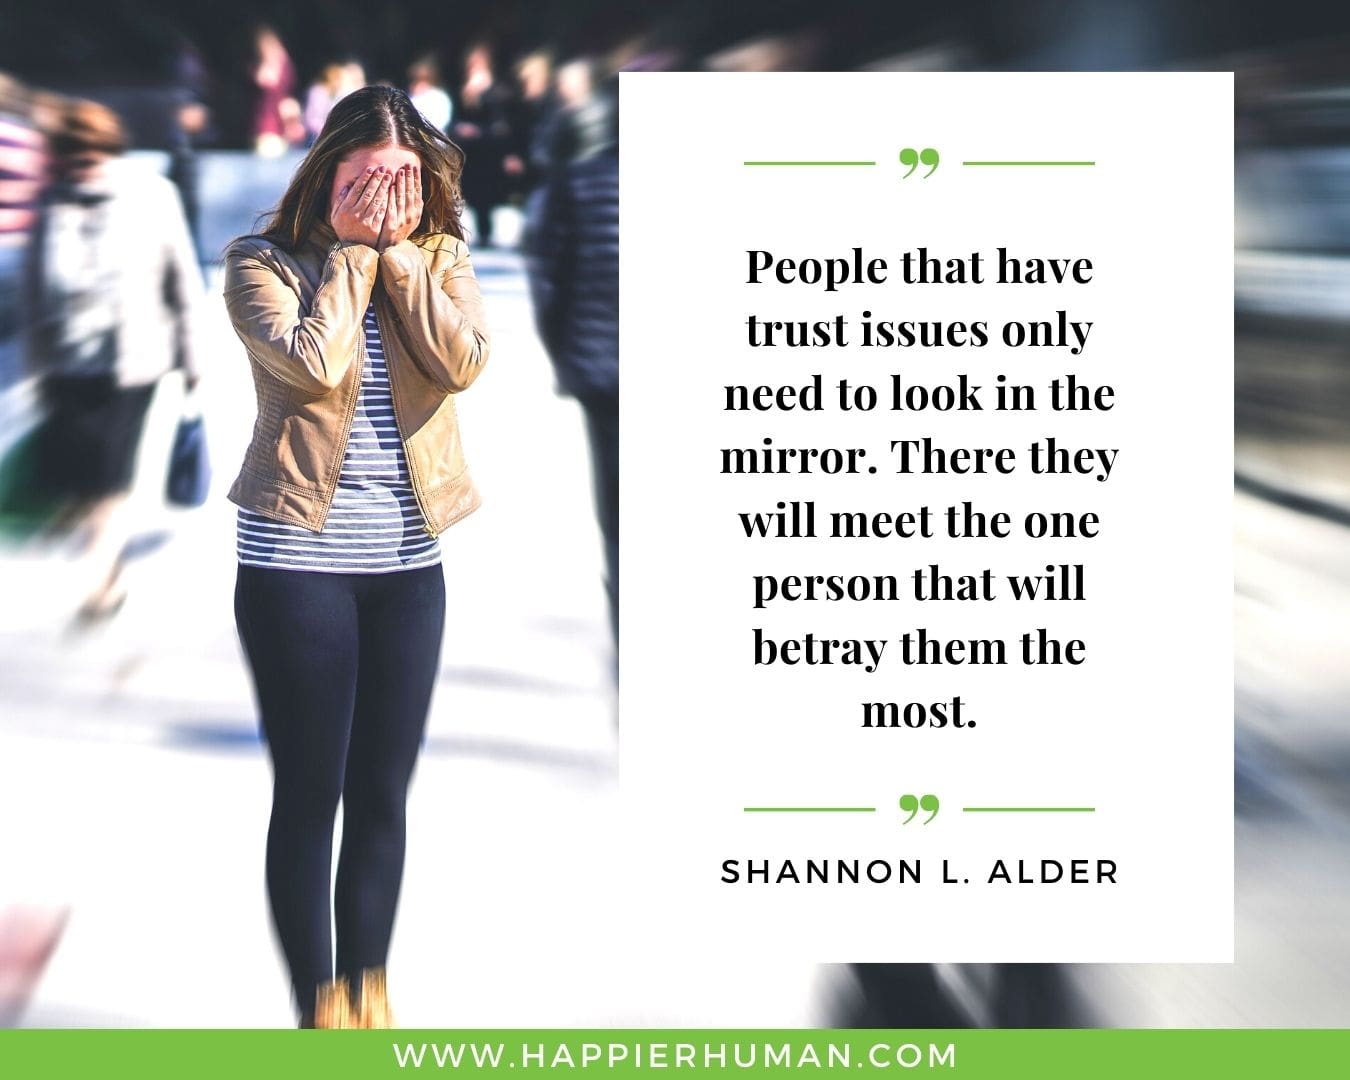 Broken Trust Quotes - “People that have trust issues only need to look in the mirror. There they will meet the one person that will betray them the most.” - Shannon L. Alder